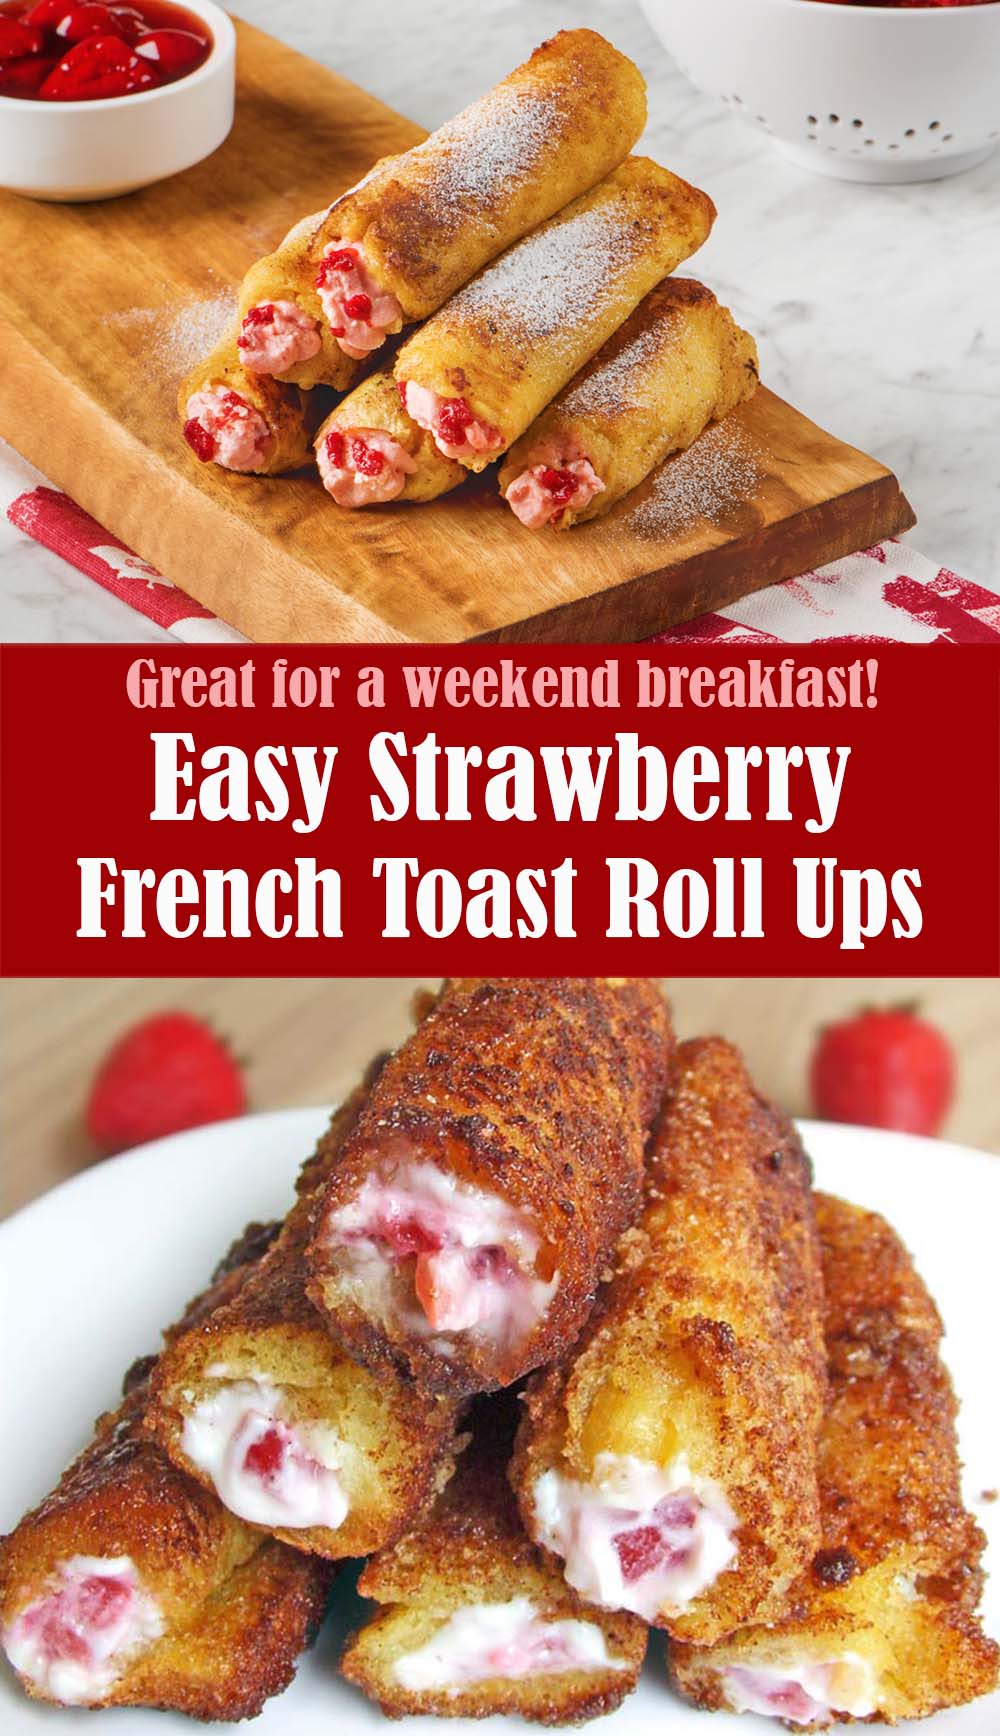 Easy Strawberry French Toast Roll Ups